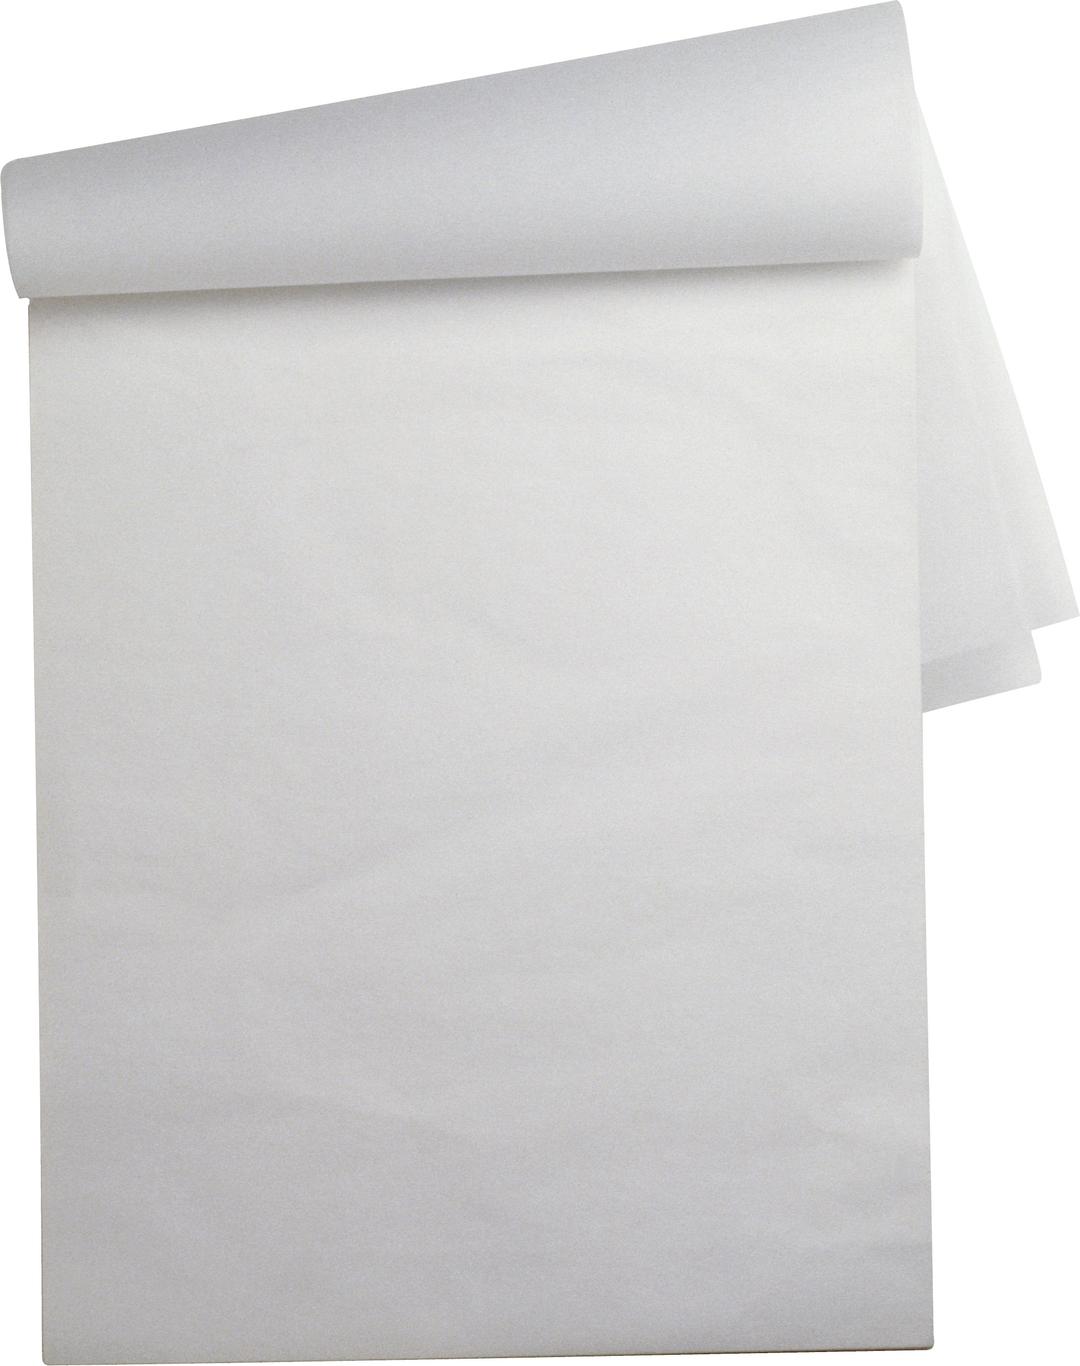 White Folded Paper Sheet png transparent